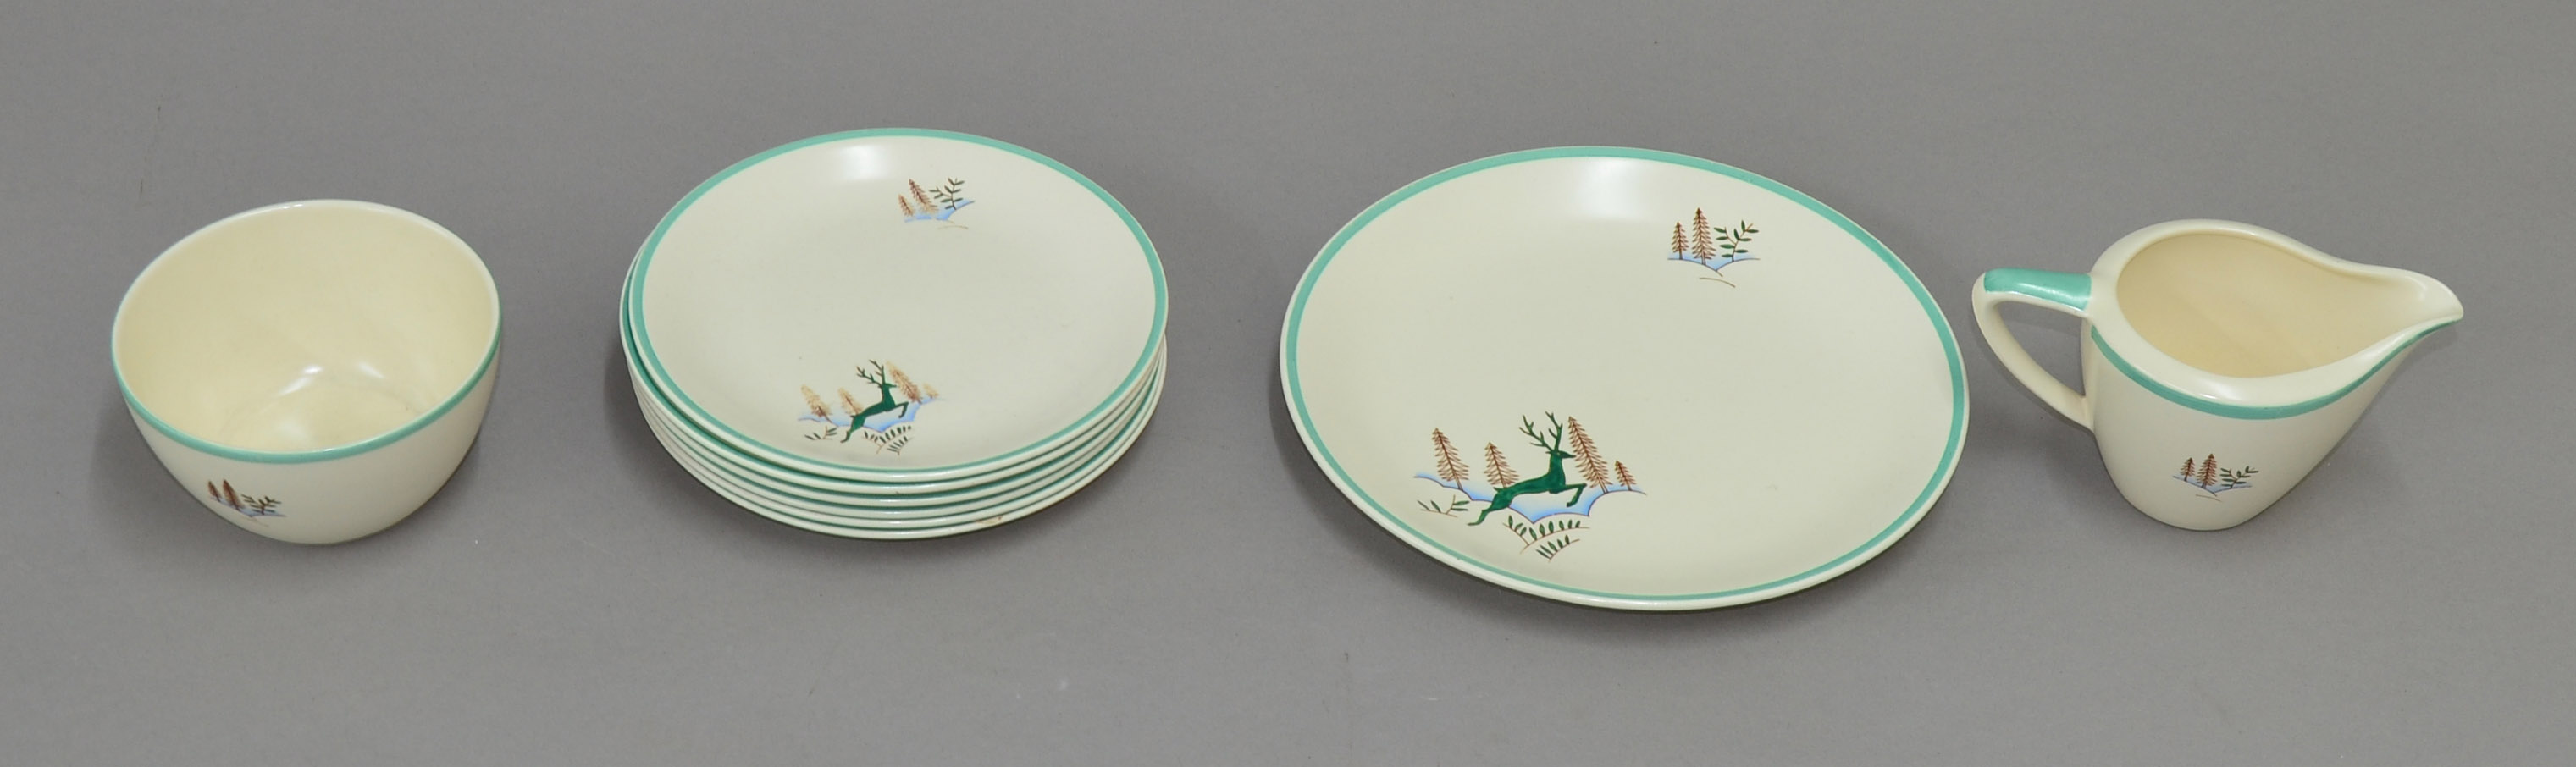 Nine pieces of Crown Devon china with turquoise banding and leaping stag decoration. Comprising six